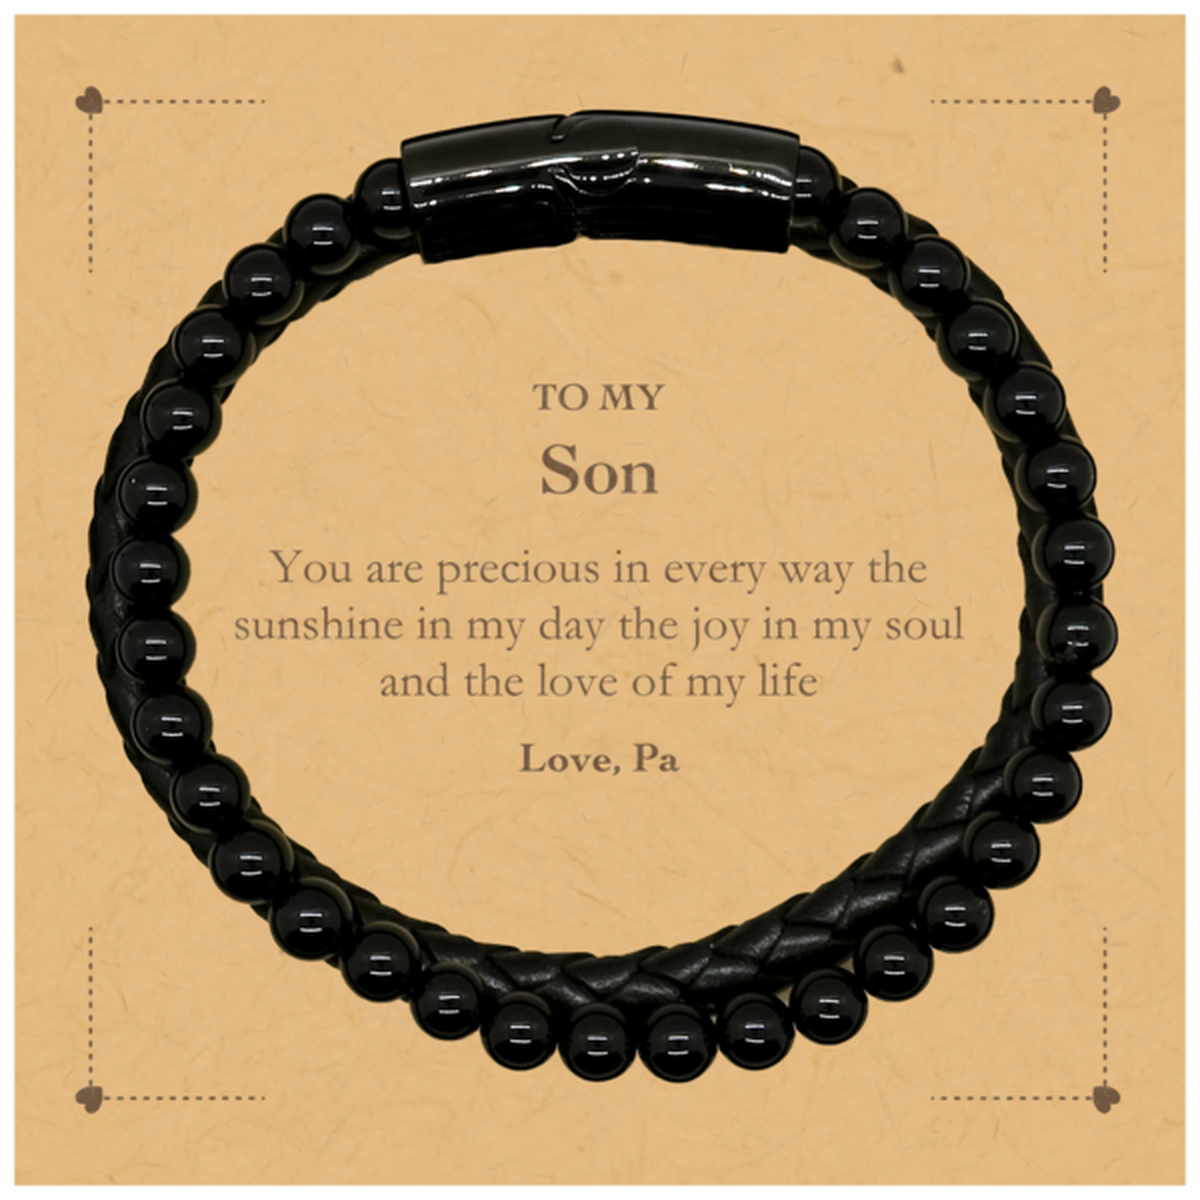 Graduation Gifts for Son Stone Leather Bracelets Present from Pa, Christmas Son Birthday Gifts Son You are precious in every way the sunshine in my day. Love, Pa